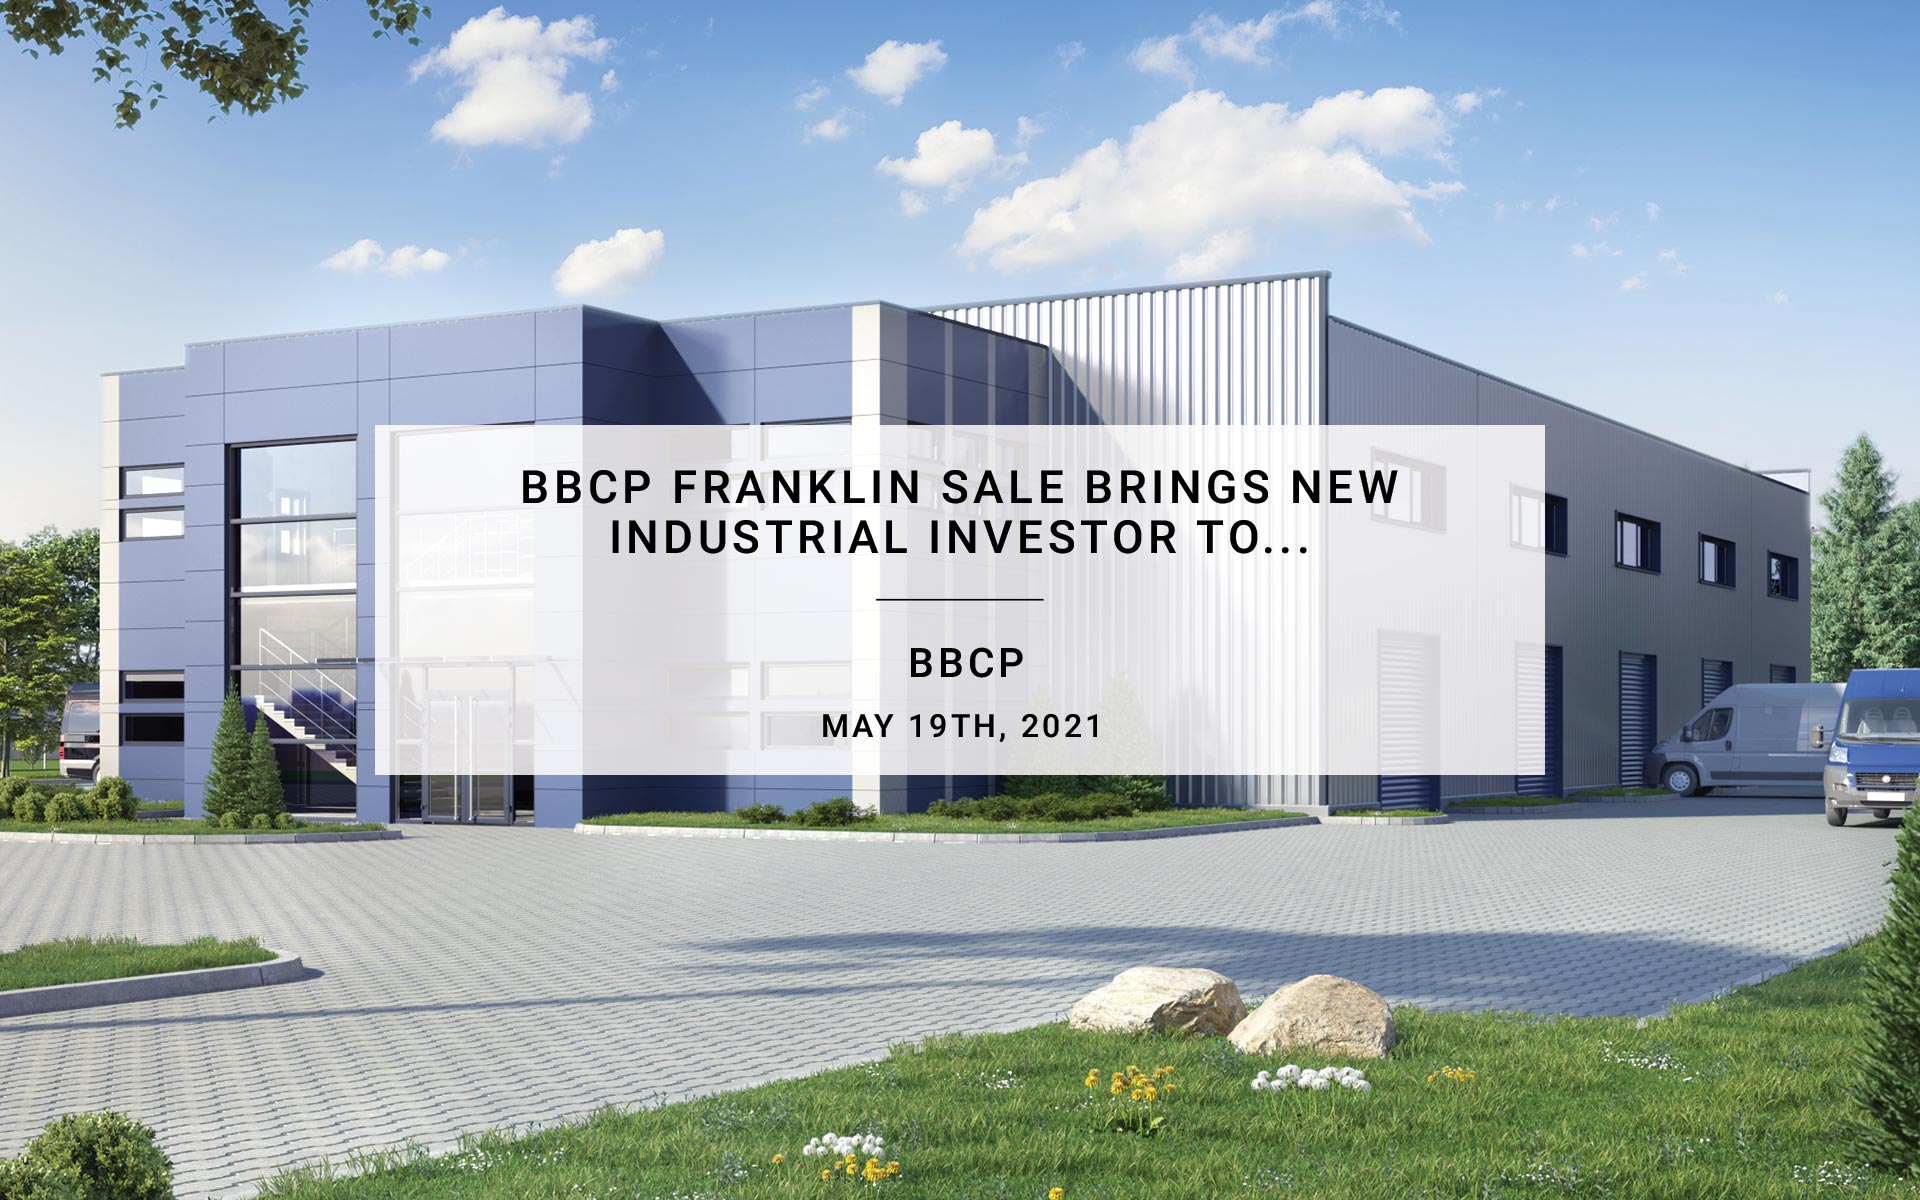 BBCP Franklin sale brings new industrial investor to the region | BBCP